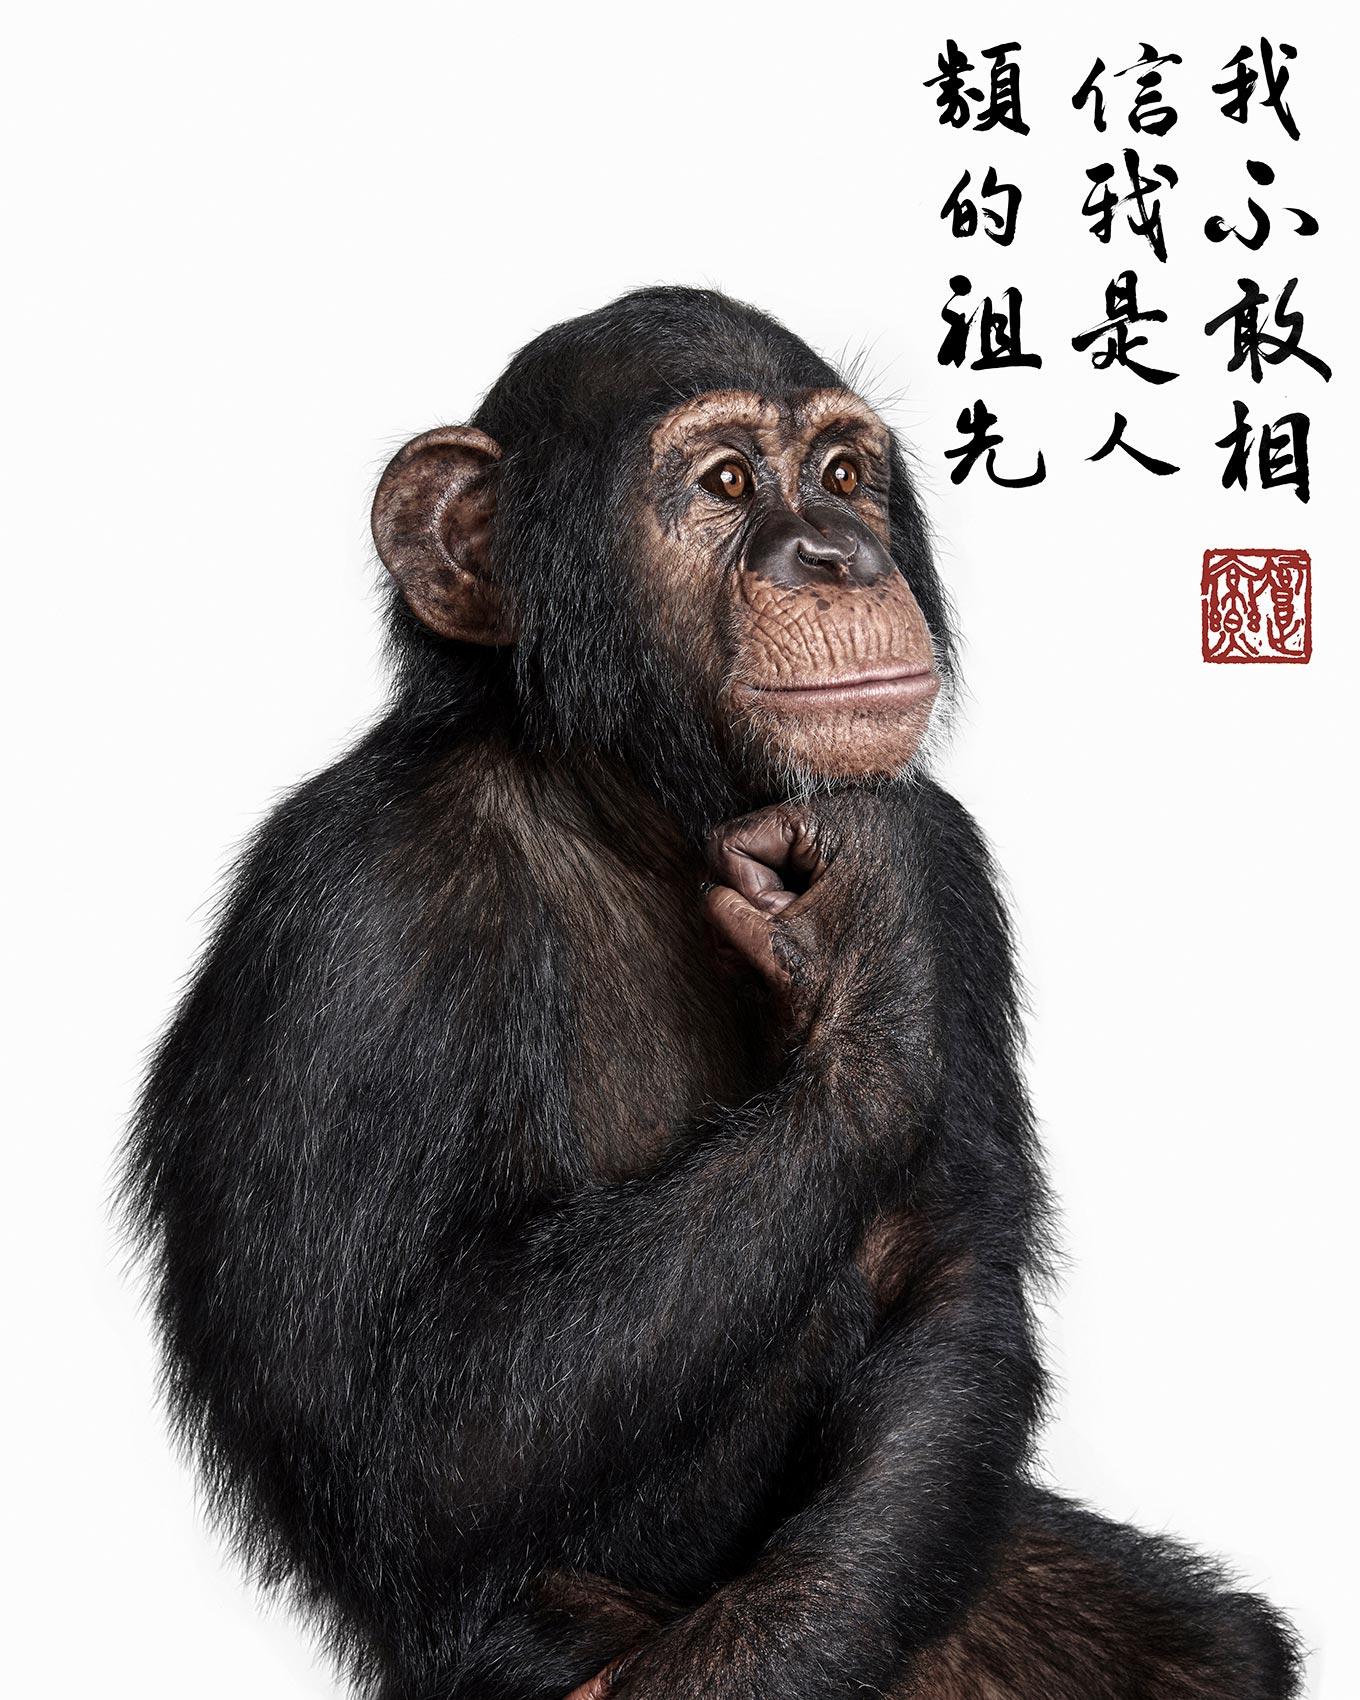 Title: Contemplative Chimpanzee Collaboration with Steven C. Rockefeller Jr
Medium: Digital C-Print on Archival Photographic Paper
Available sizes:
50" x 40", Edition of 5
60" x 48", Edition of 3

Few photographers in the world have photographed as